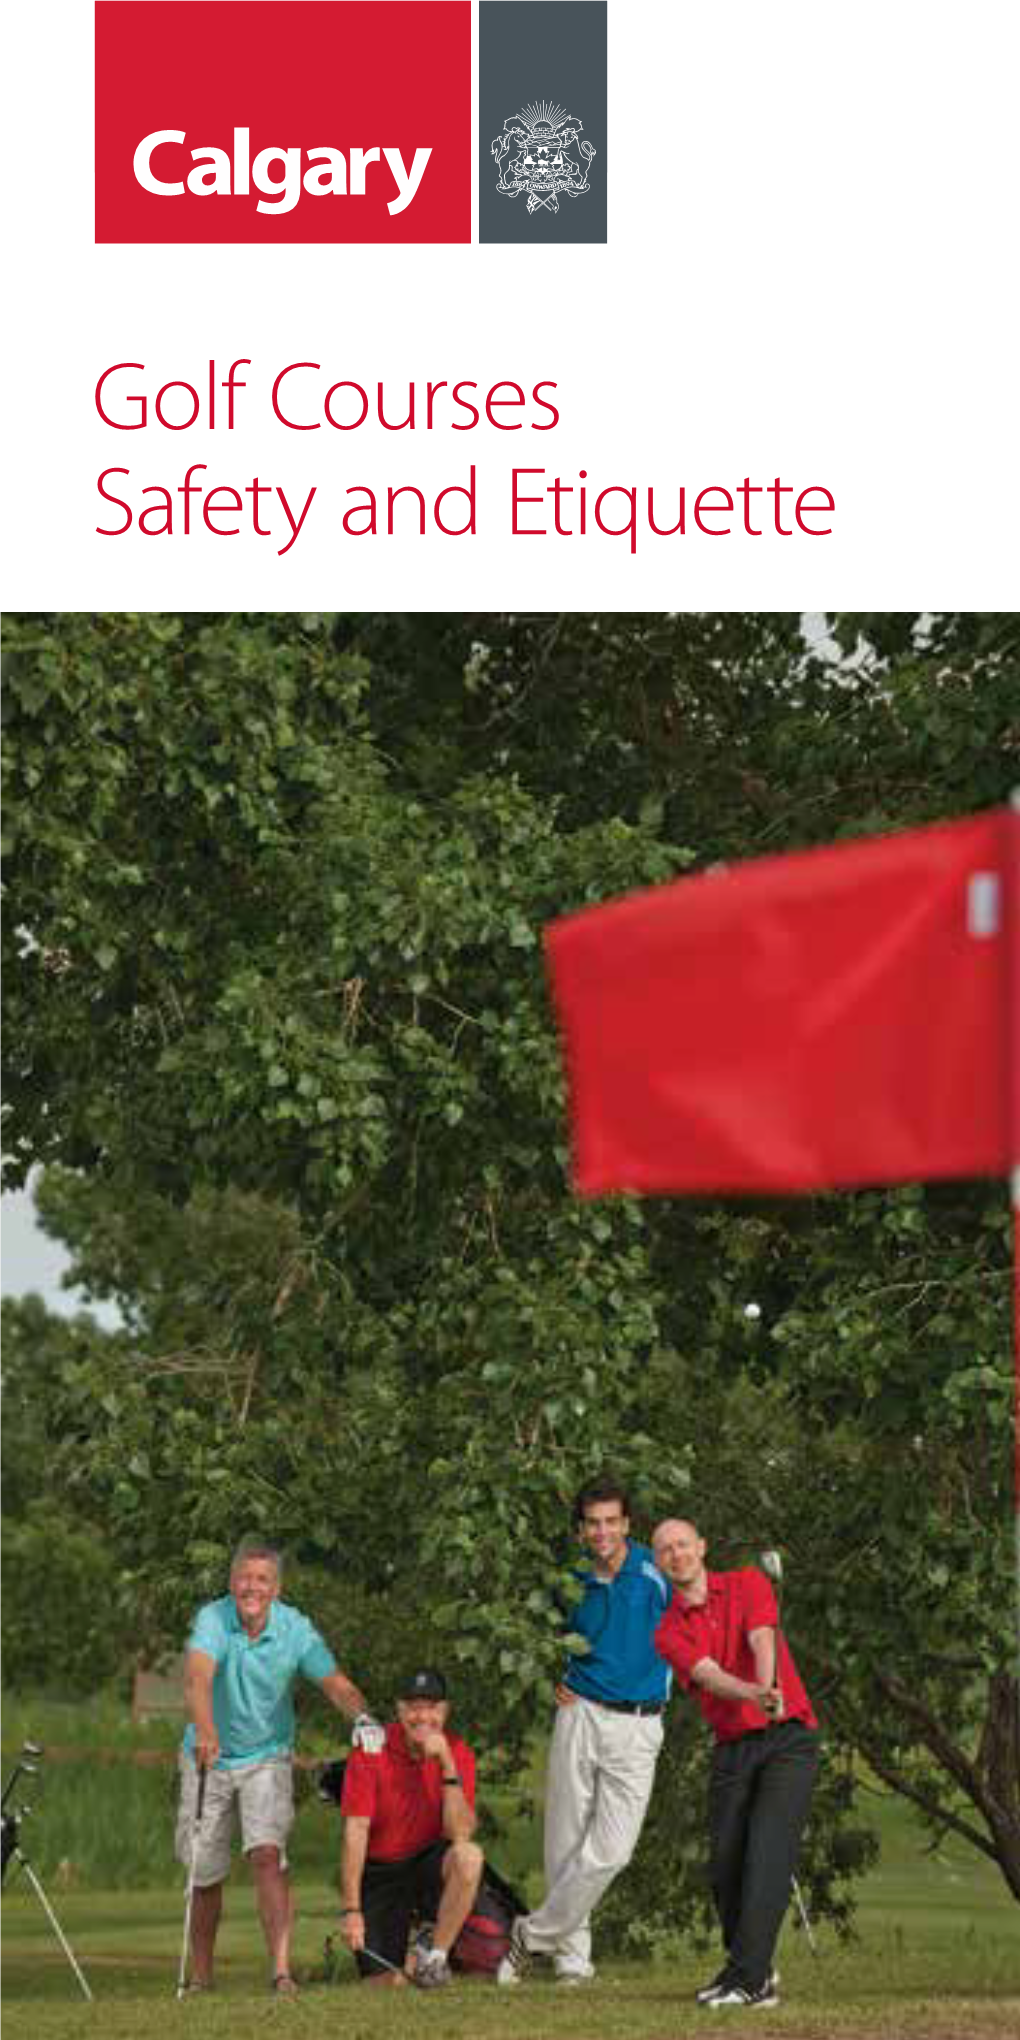 Golf Courses Safety and Etiquette